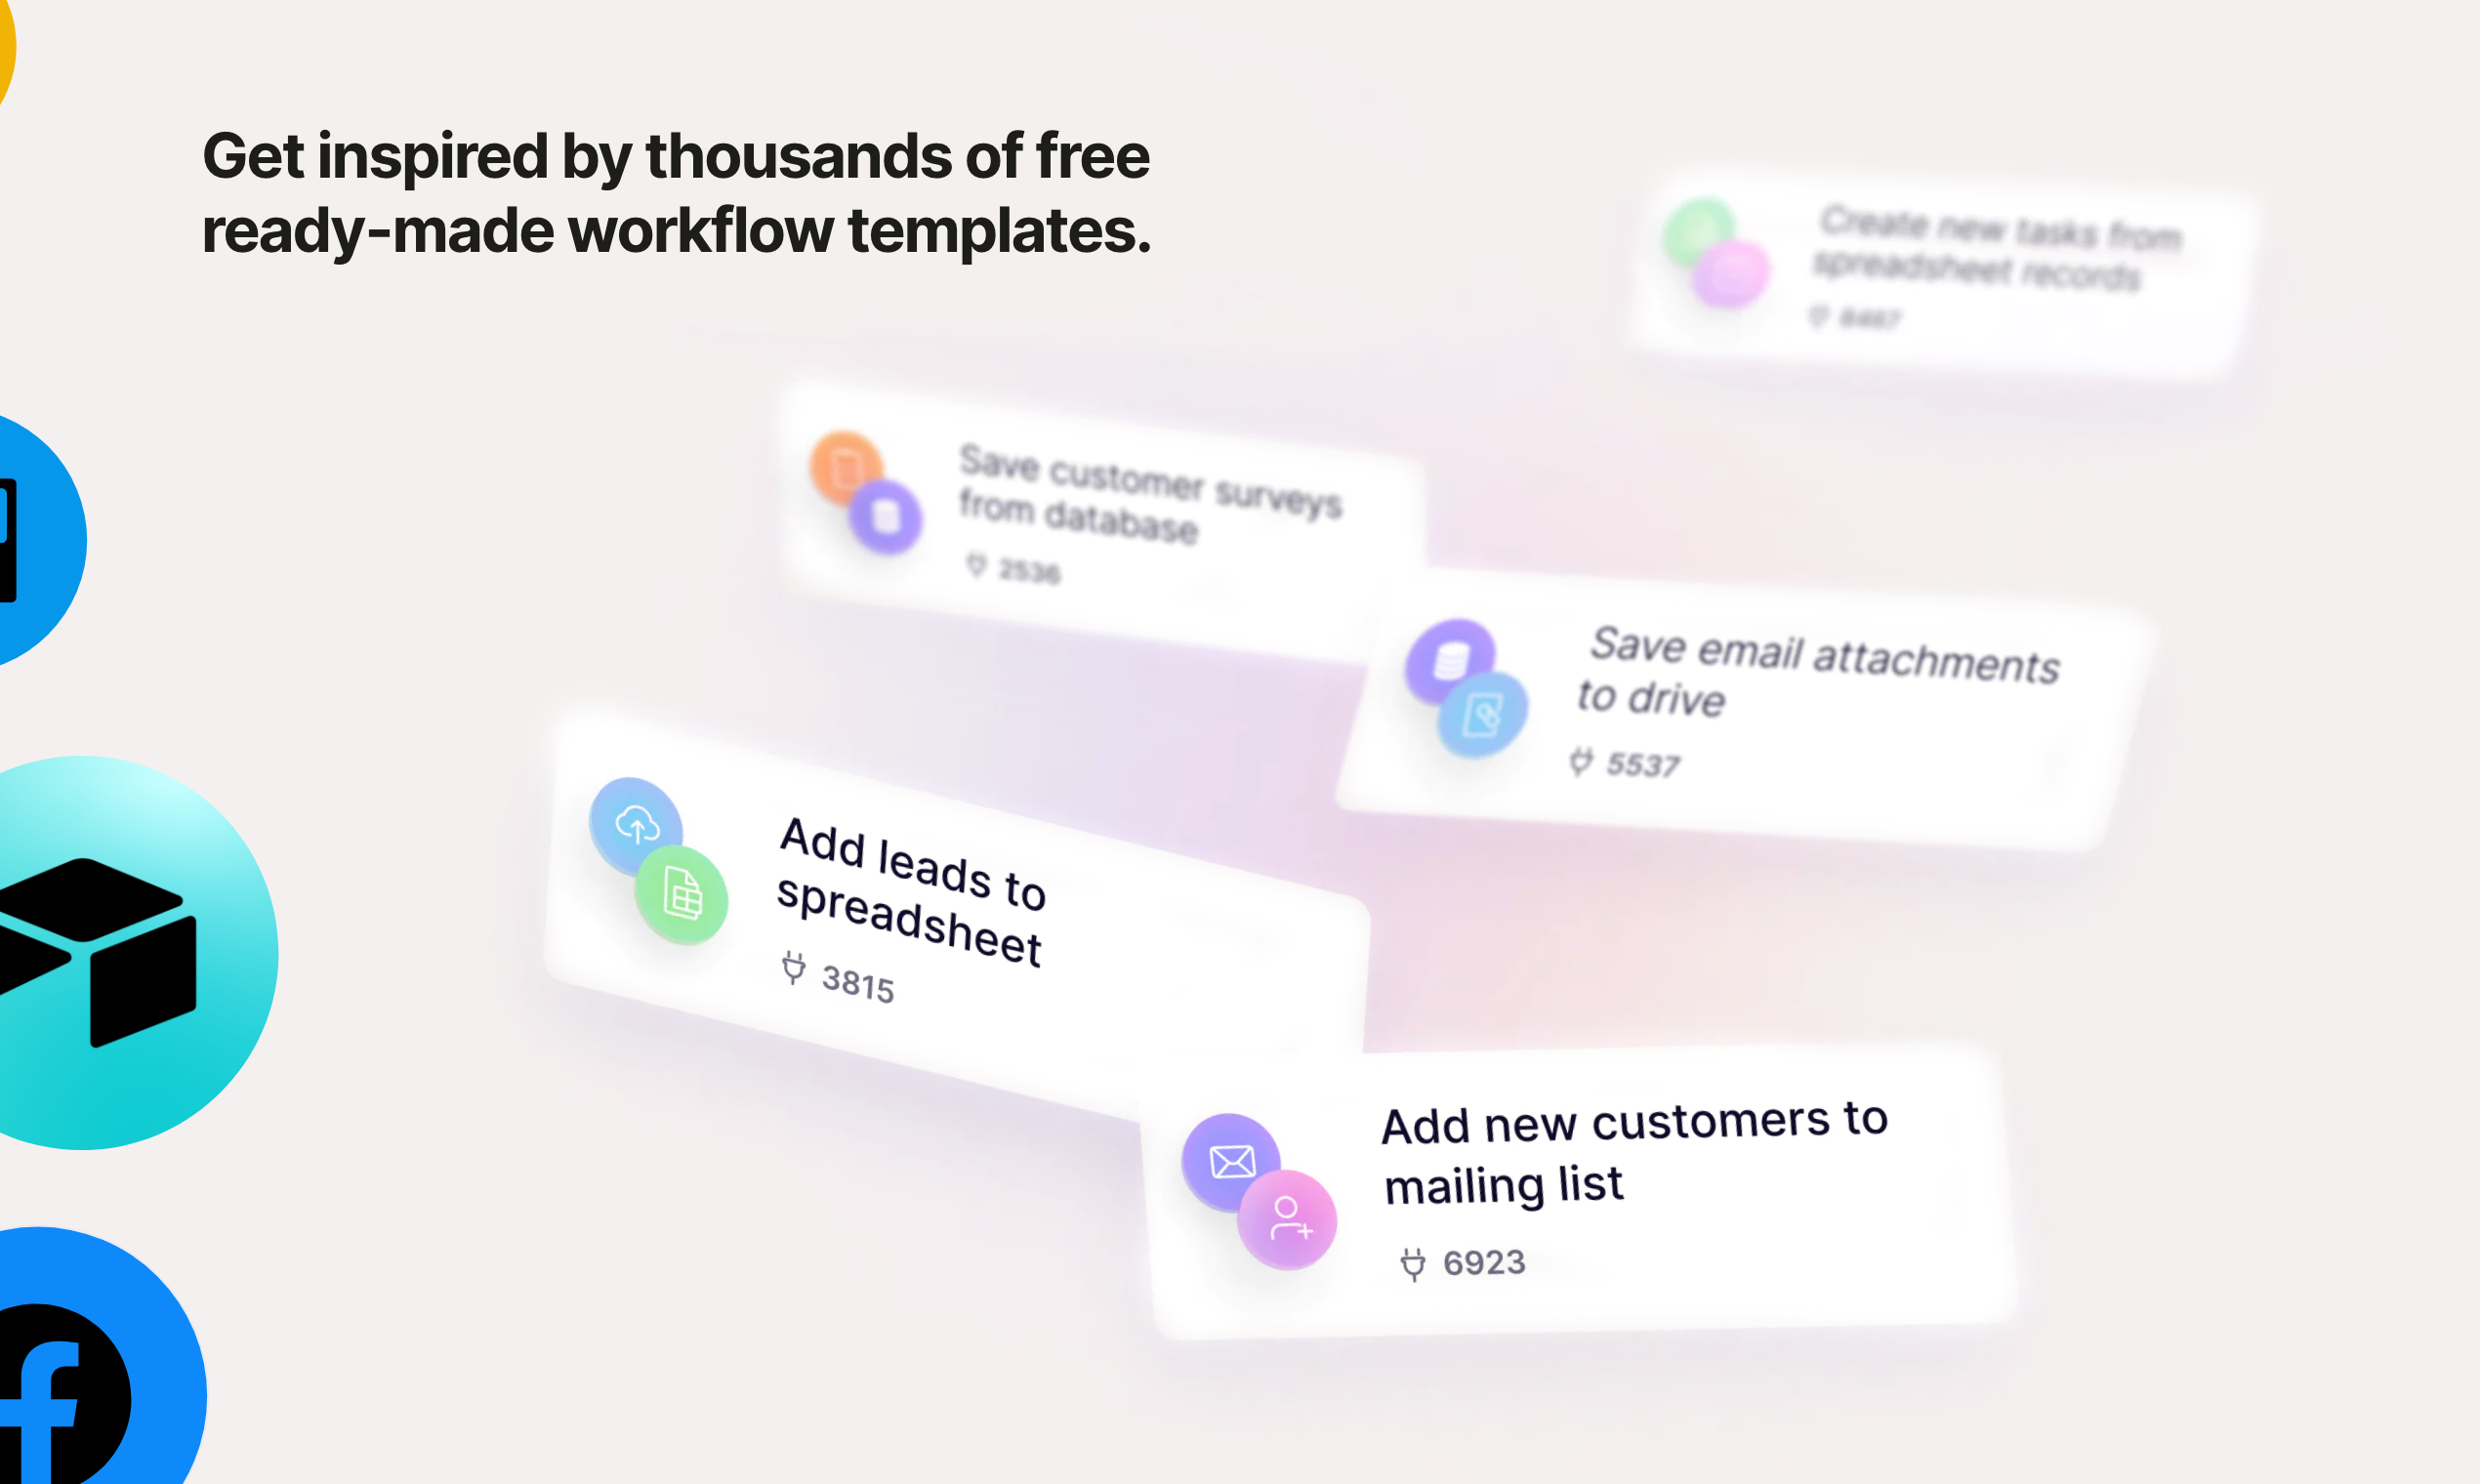 Get inspired by thousands of free ready-made workflow templates.